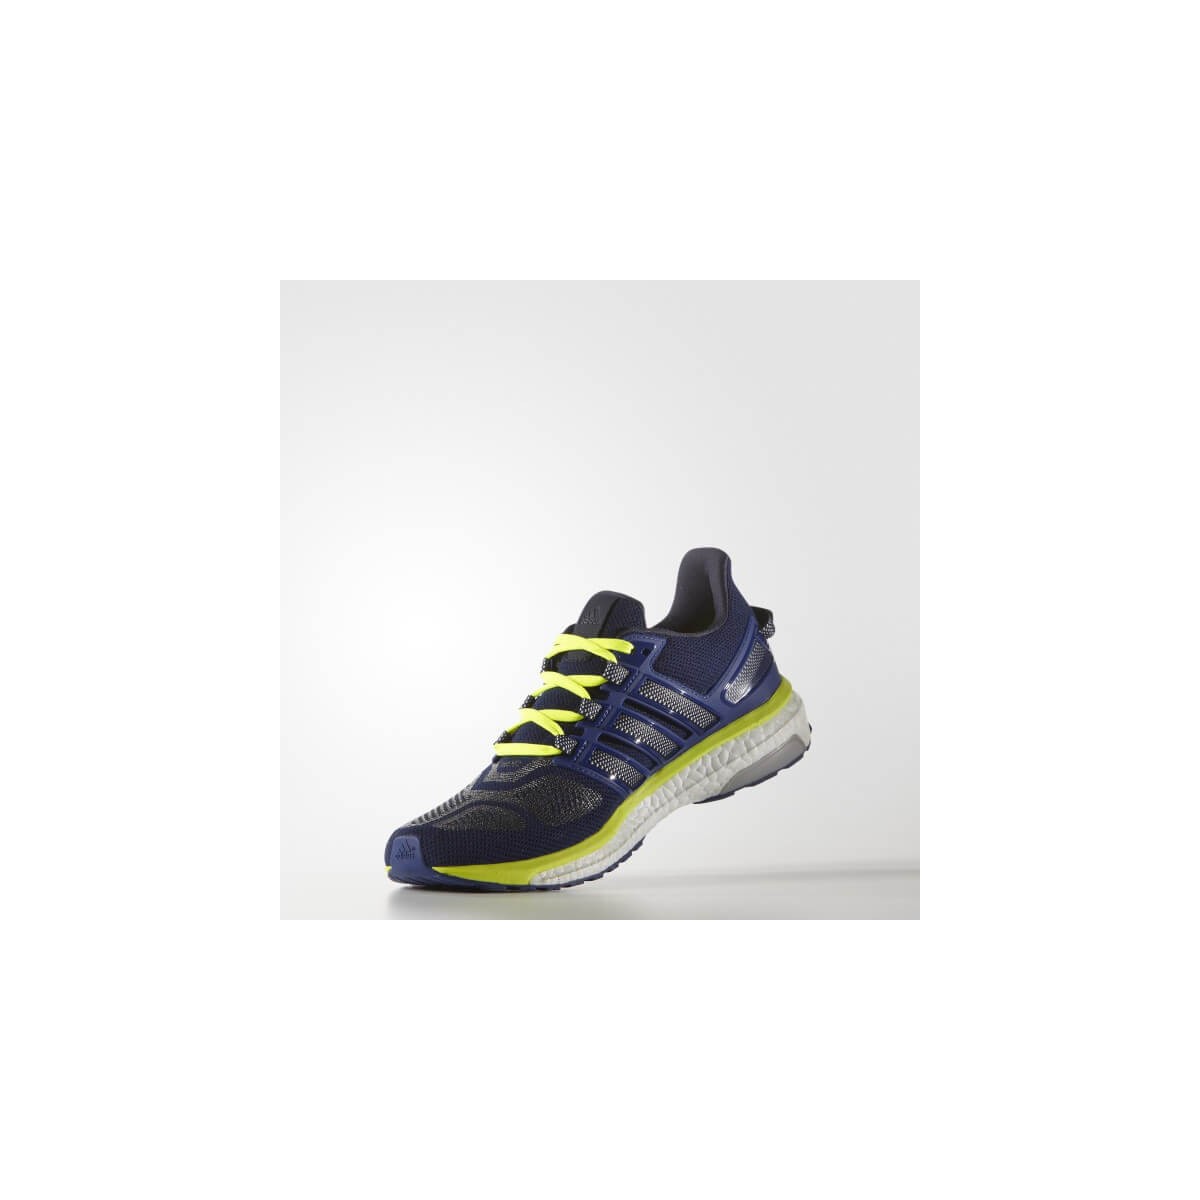 Adidas Energy Boost 3 Blue Navy Yellow AW16 m